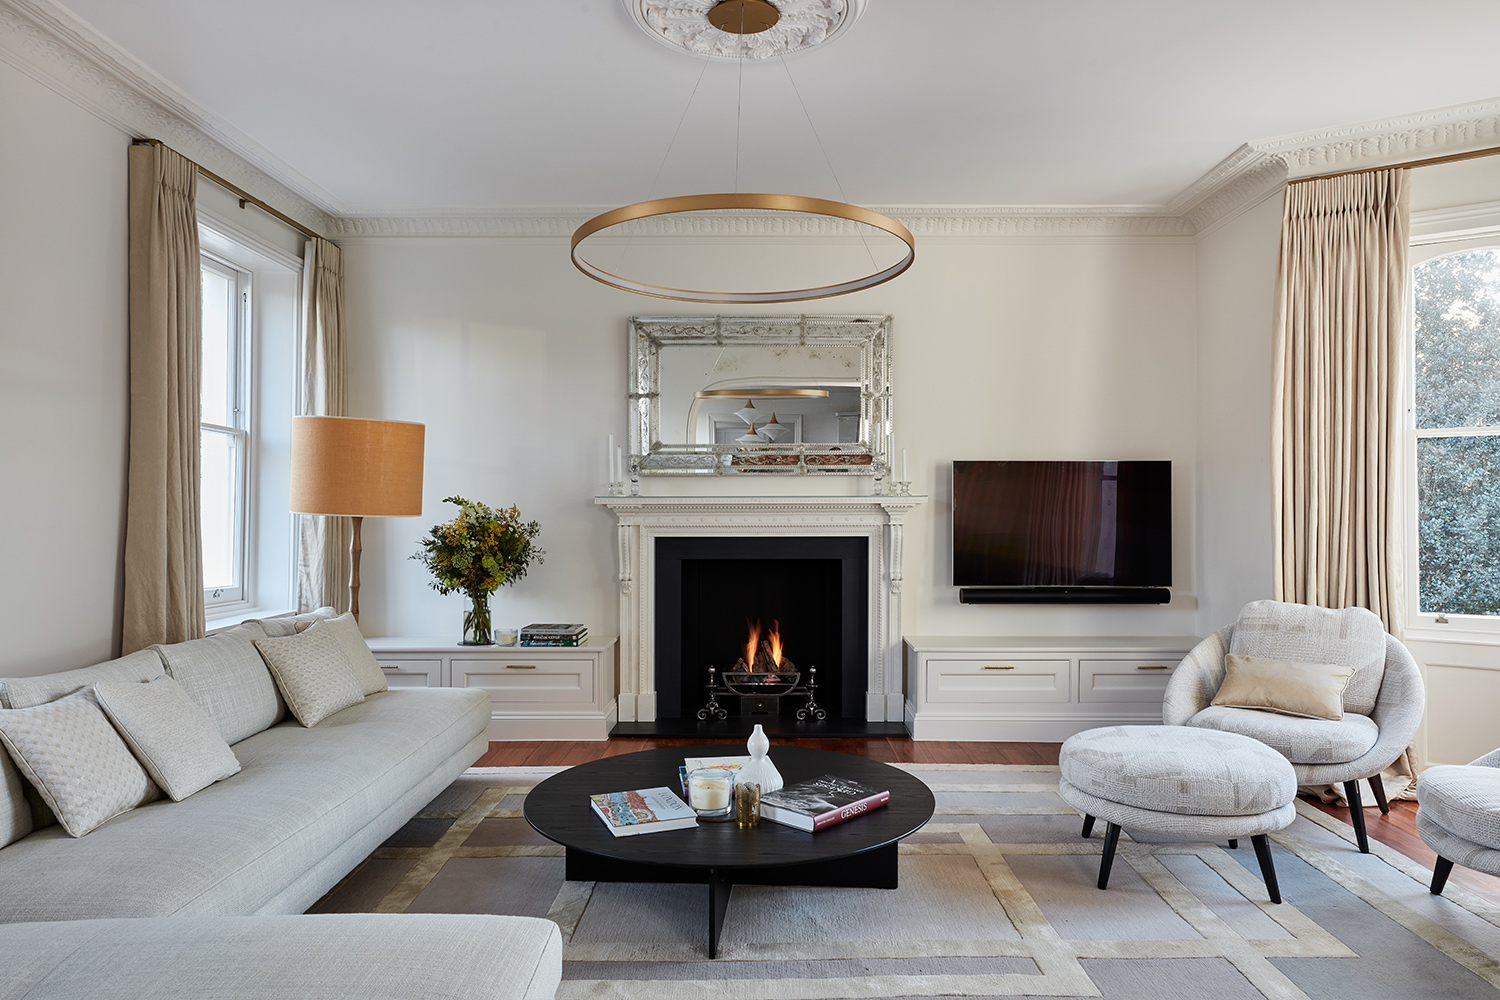 Living room from a Hampstead luxury interior design project